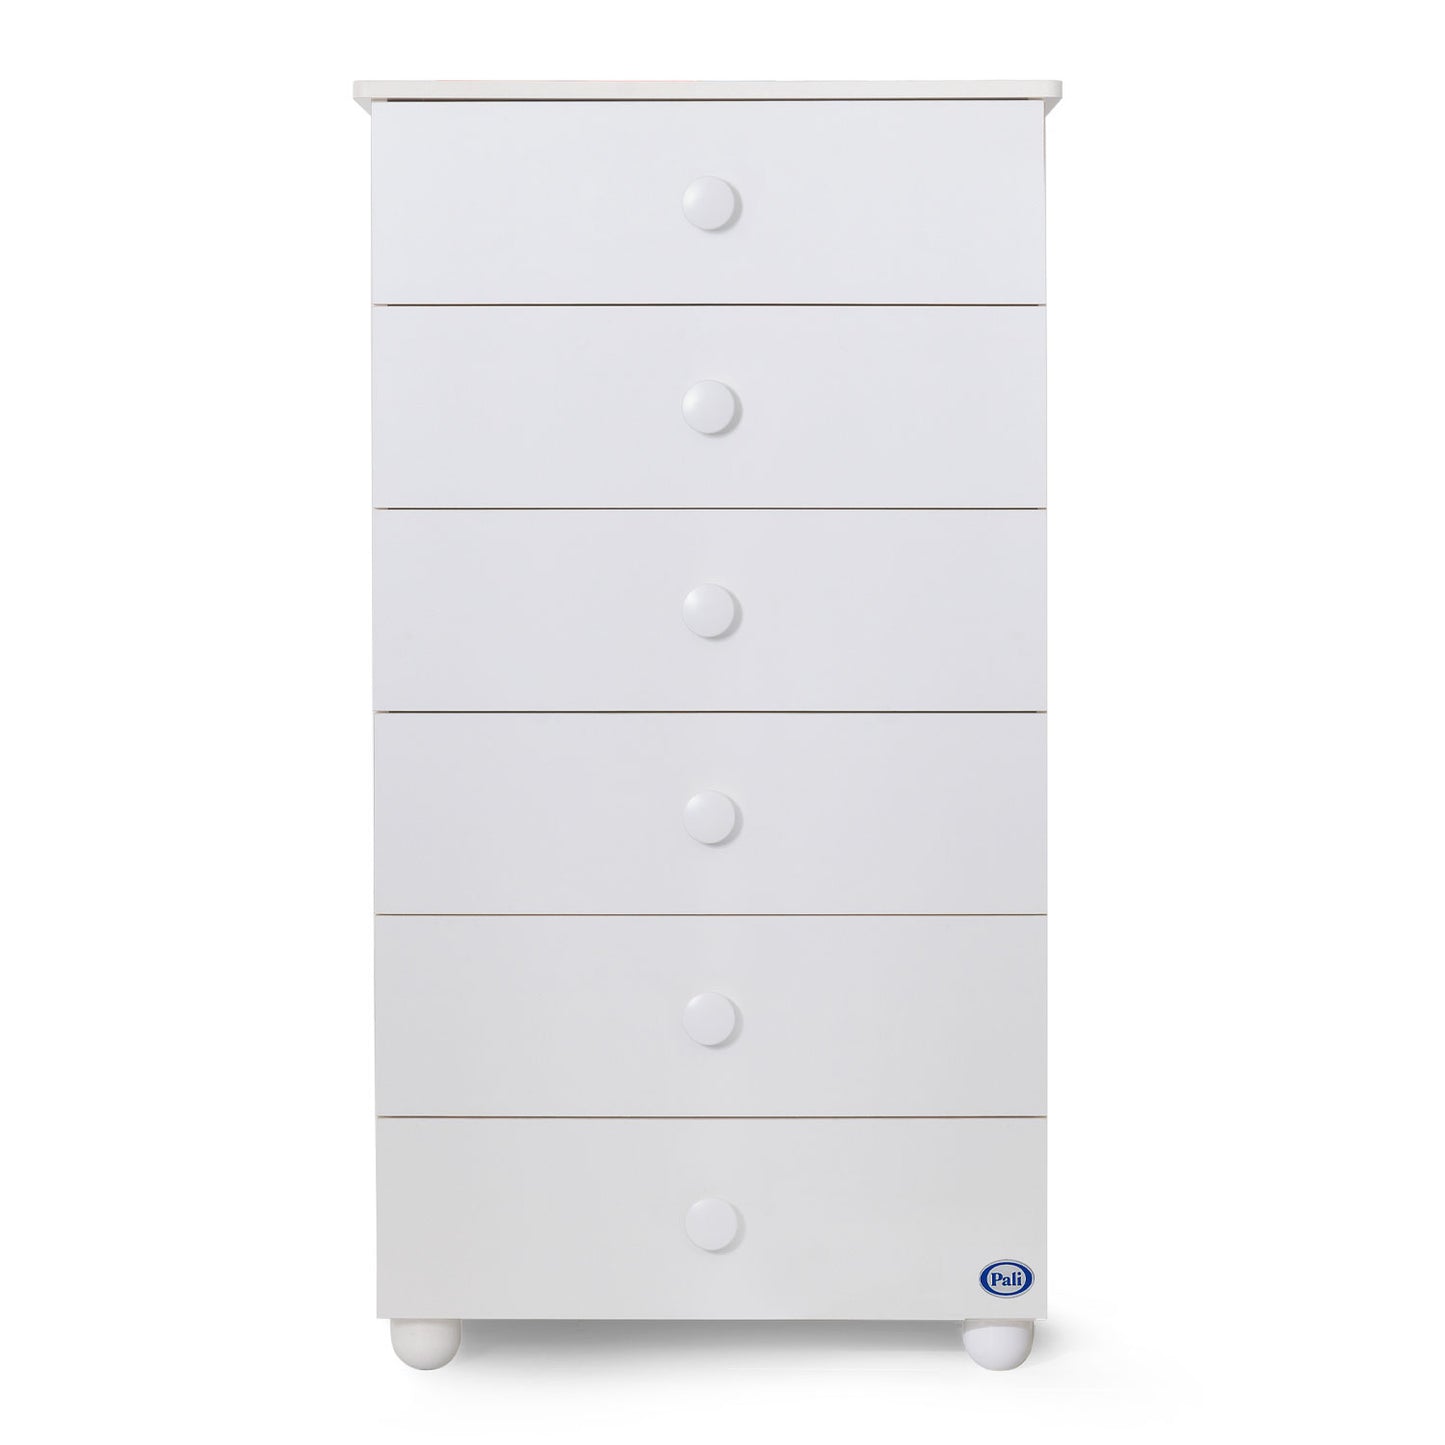 Eco White Wooden 6 Drawer Tallboy by Pali